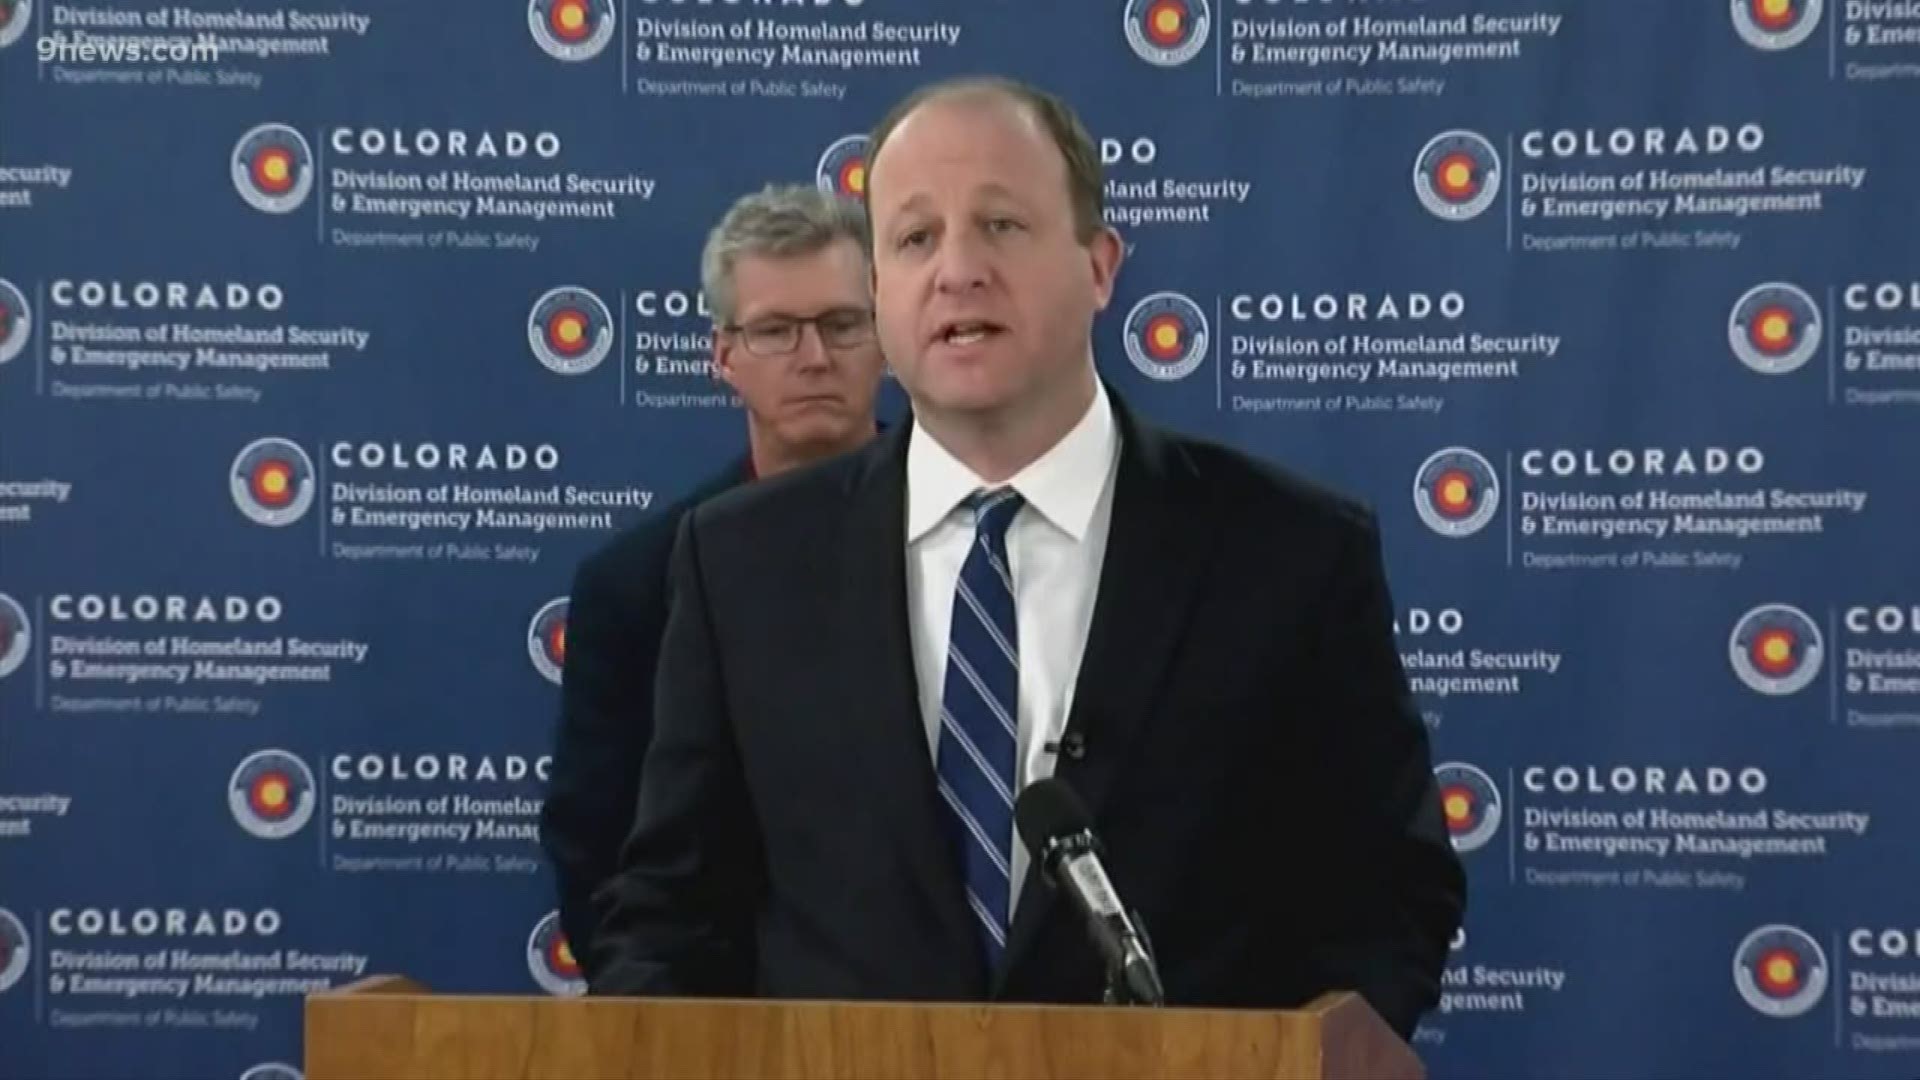 Polis also said he sent a letter to President Donald Trump requesting that he declare a major disaster area for Colorado as he has for California and New York.